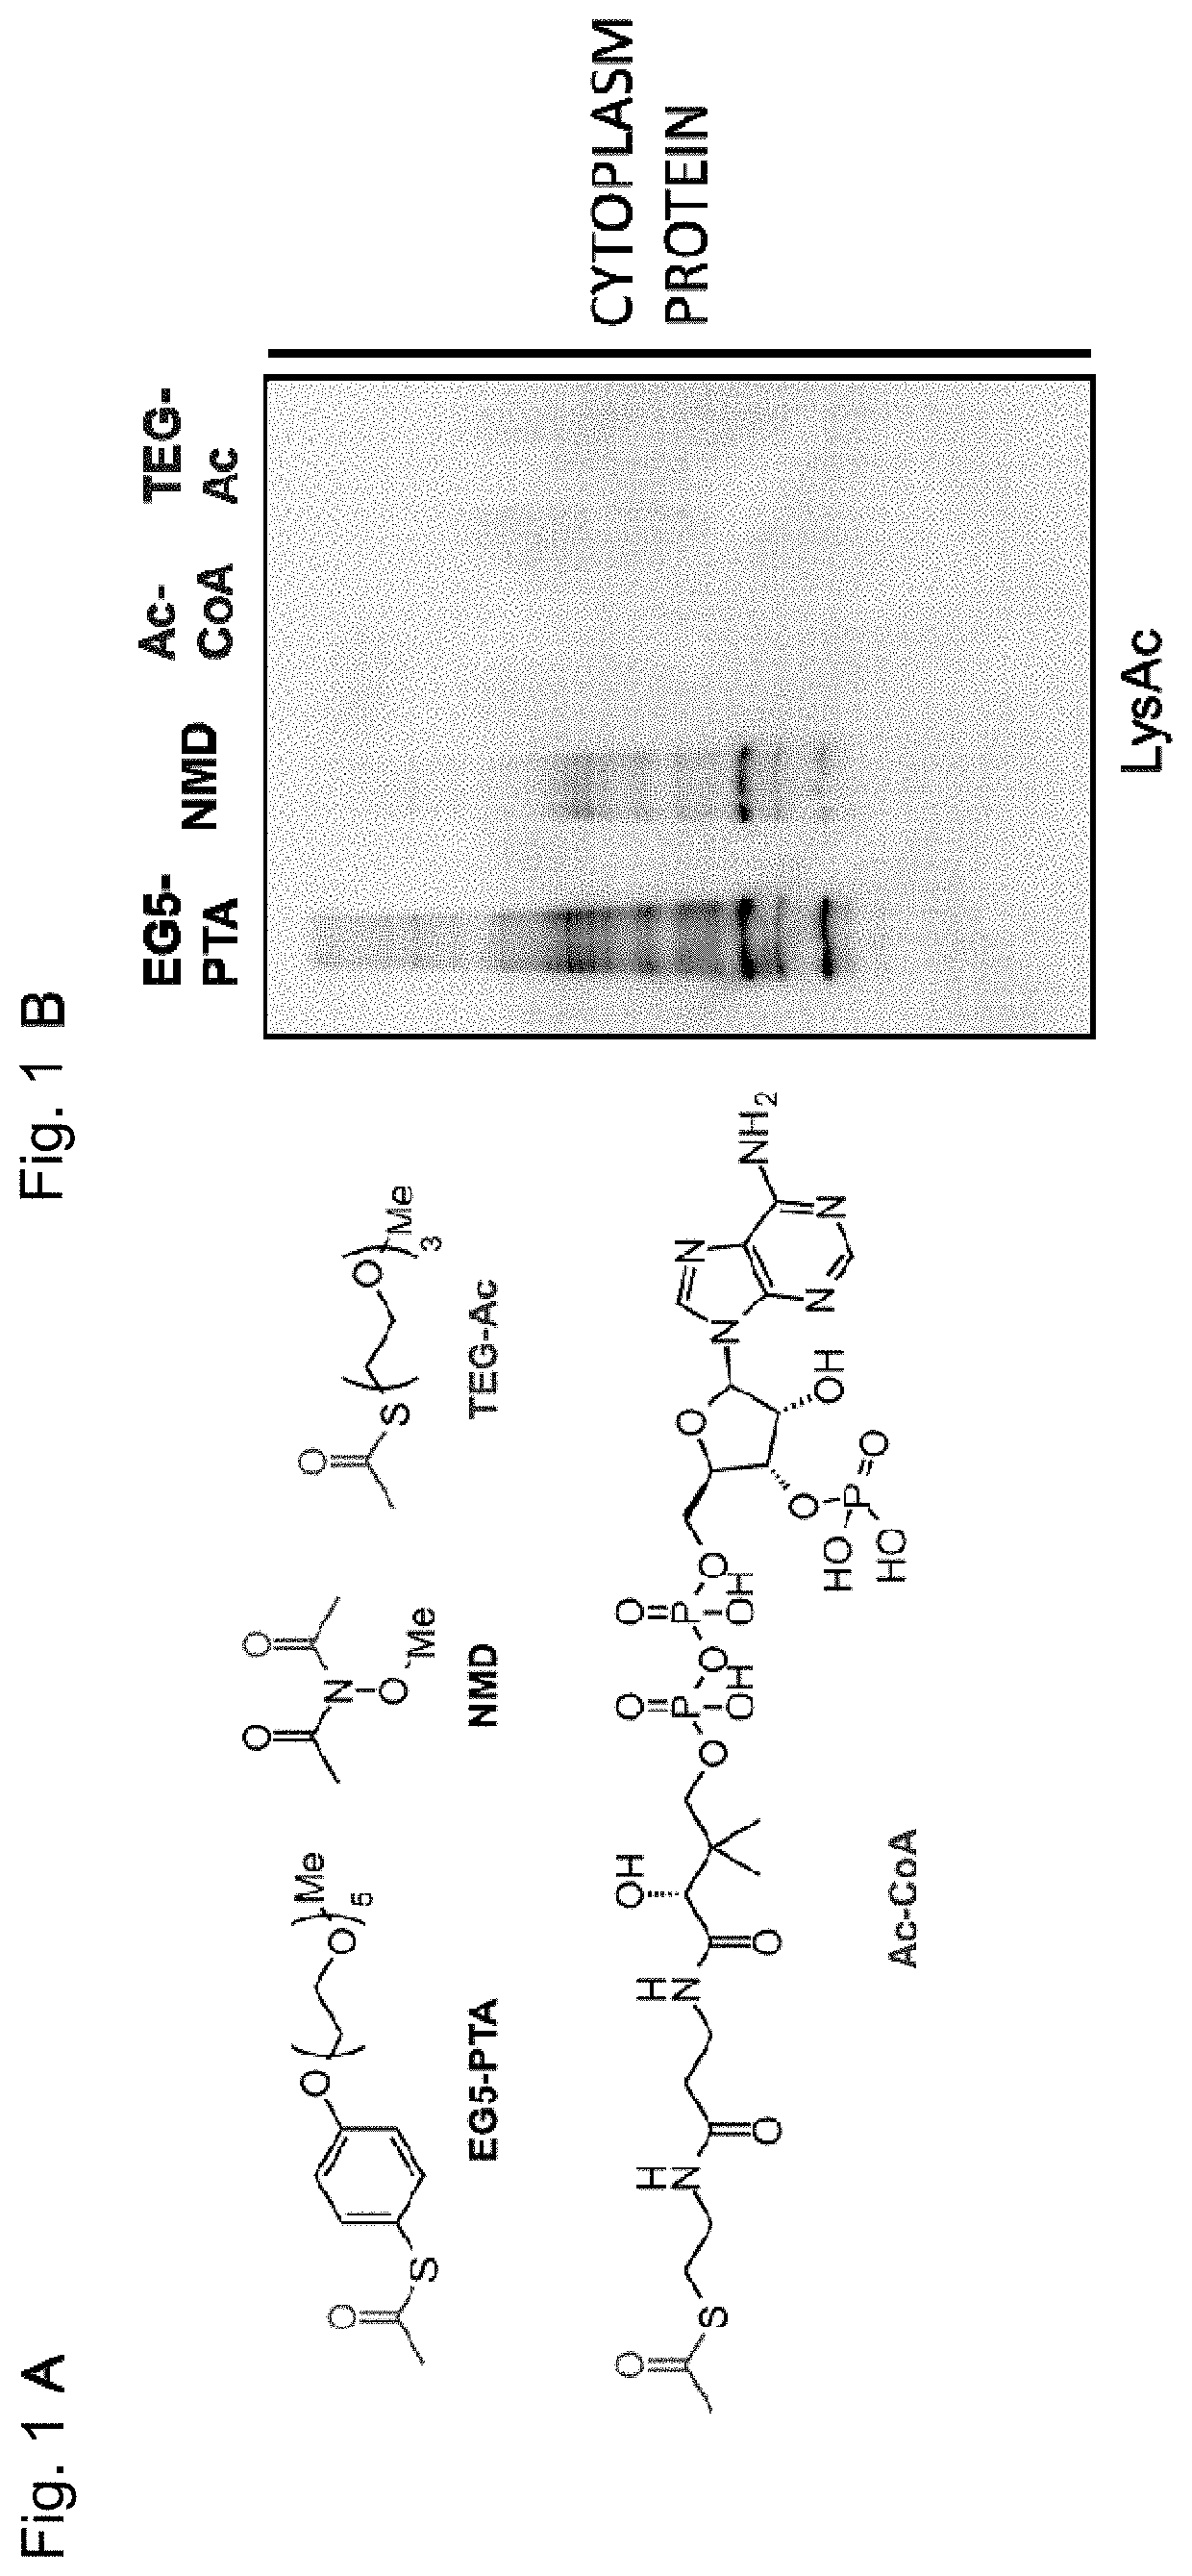 Artificial catalyst system for selective acylation of chromosome protein